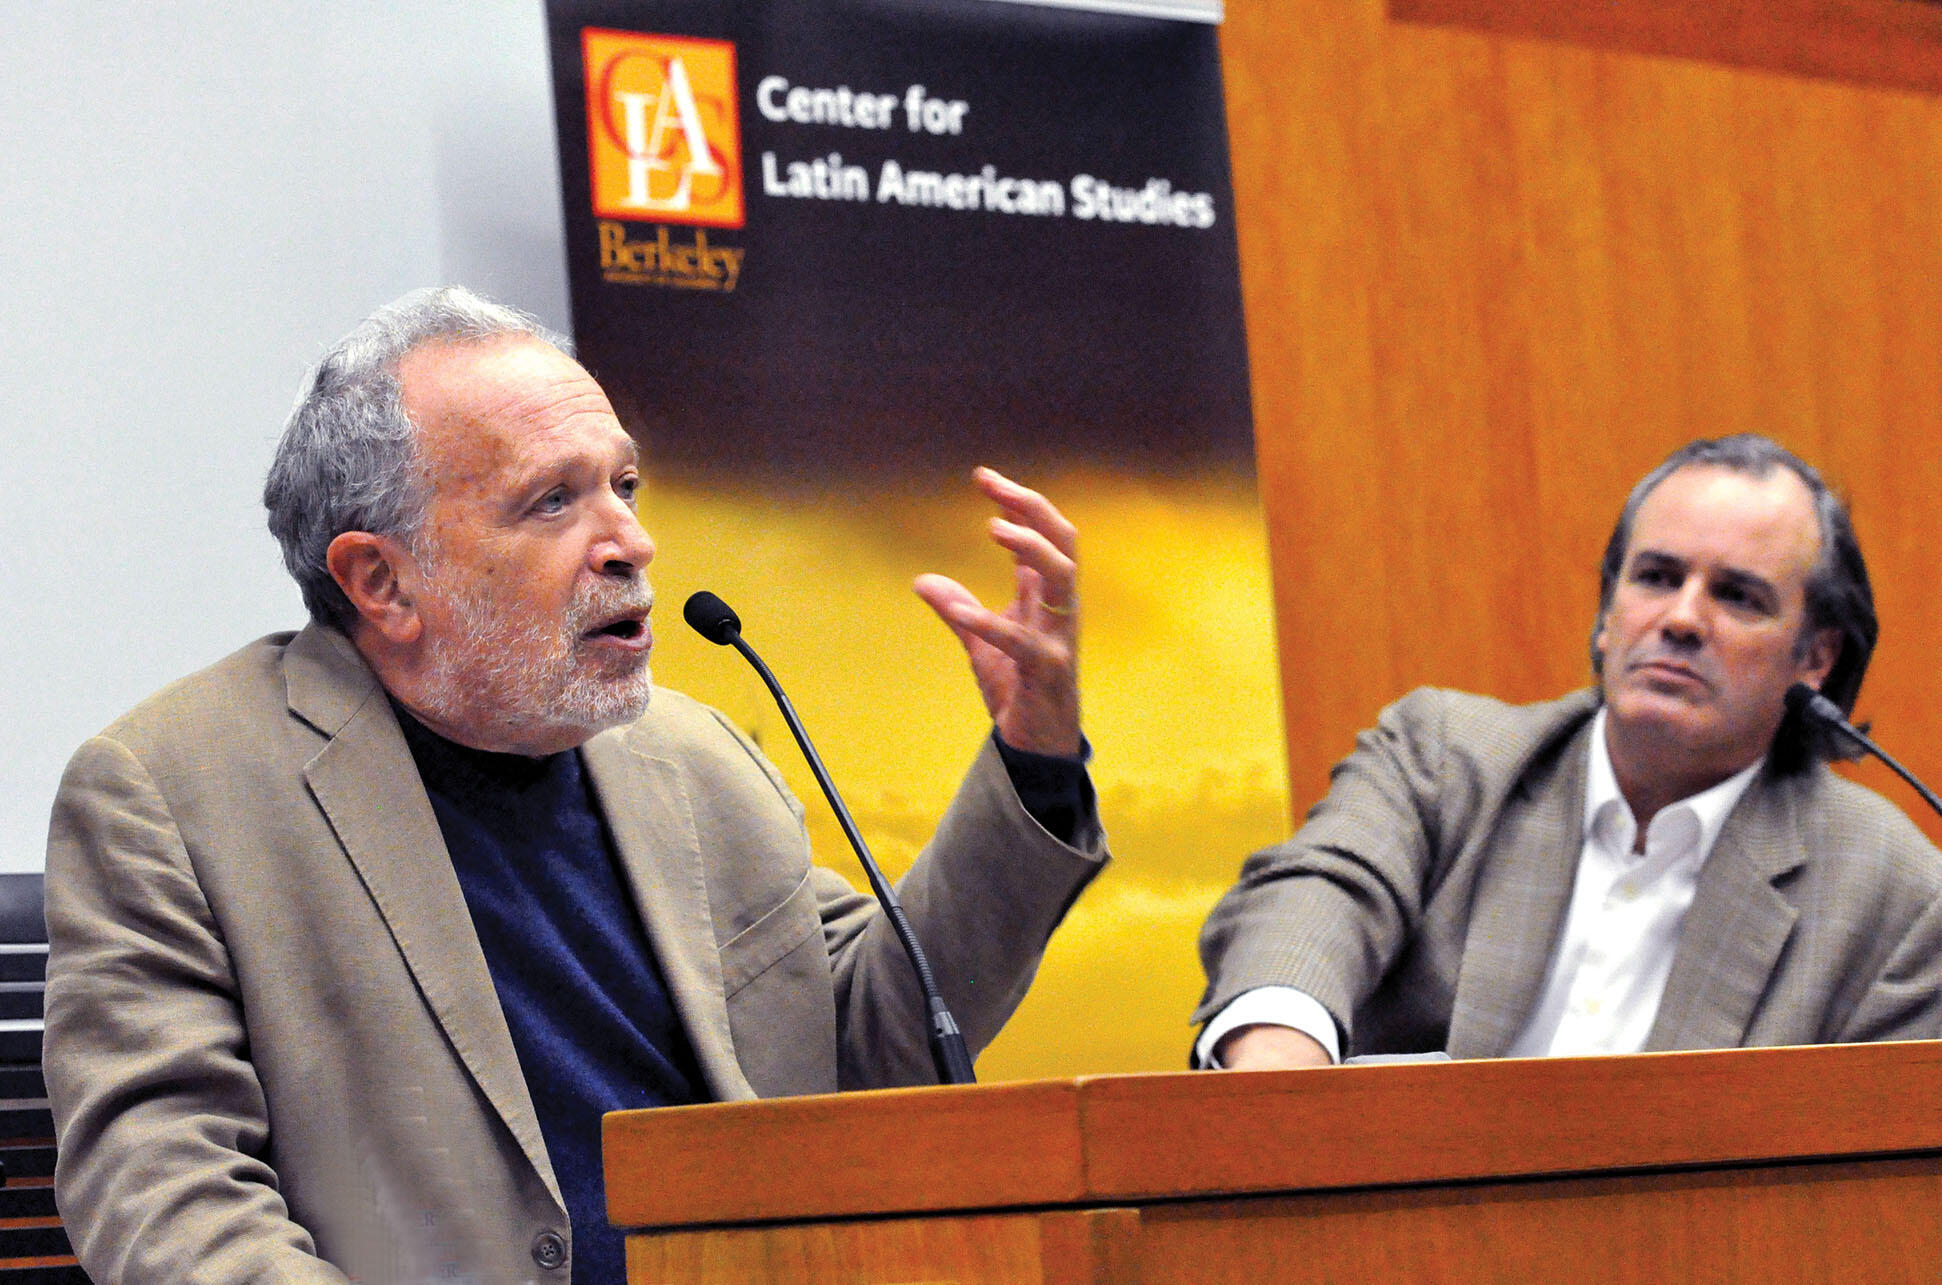 Robert Reich and José Miguel Benavente speak at the Chile-California Conference in 2014. (Photo by Peg Skorpinski.)